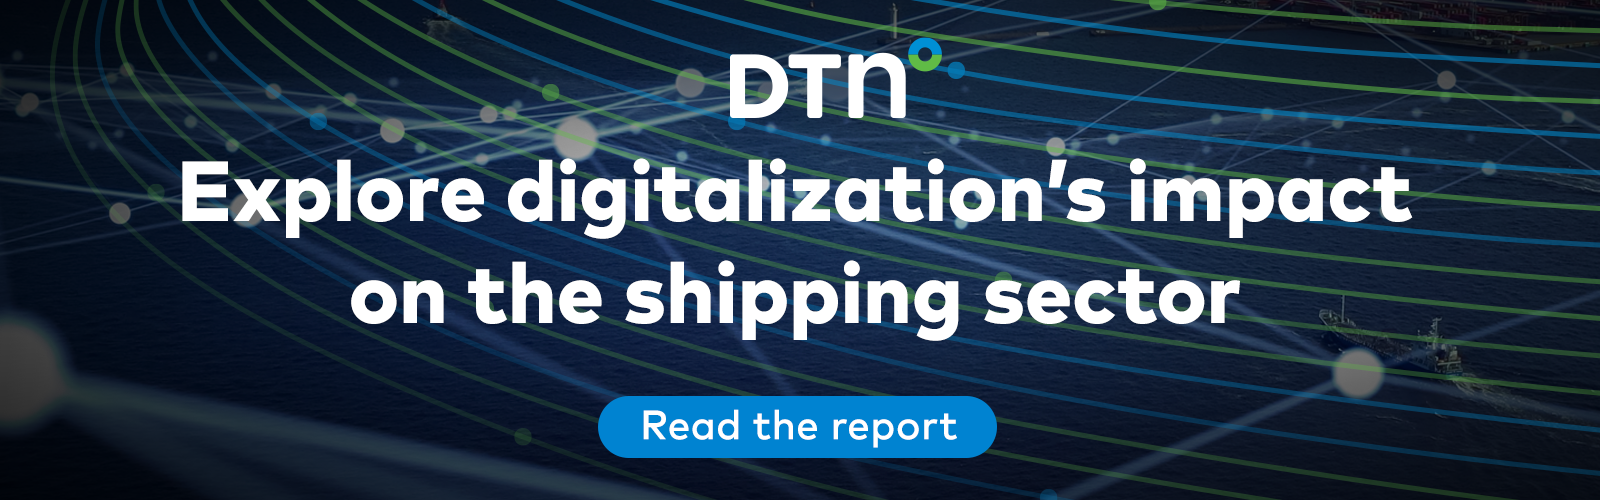 Explore digitalization’s impact on the shipping sector